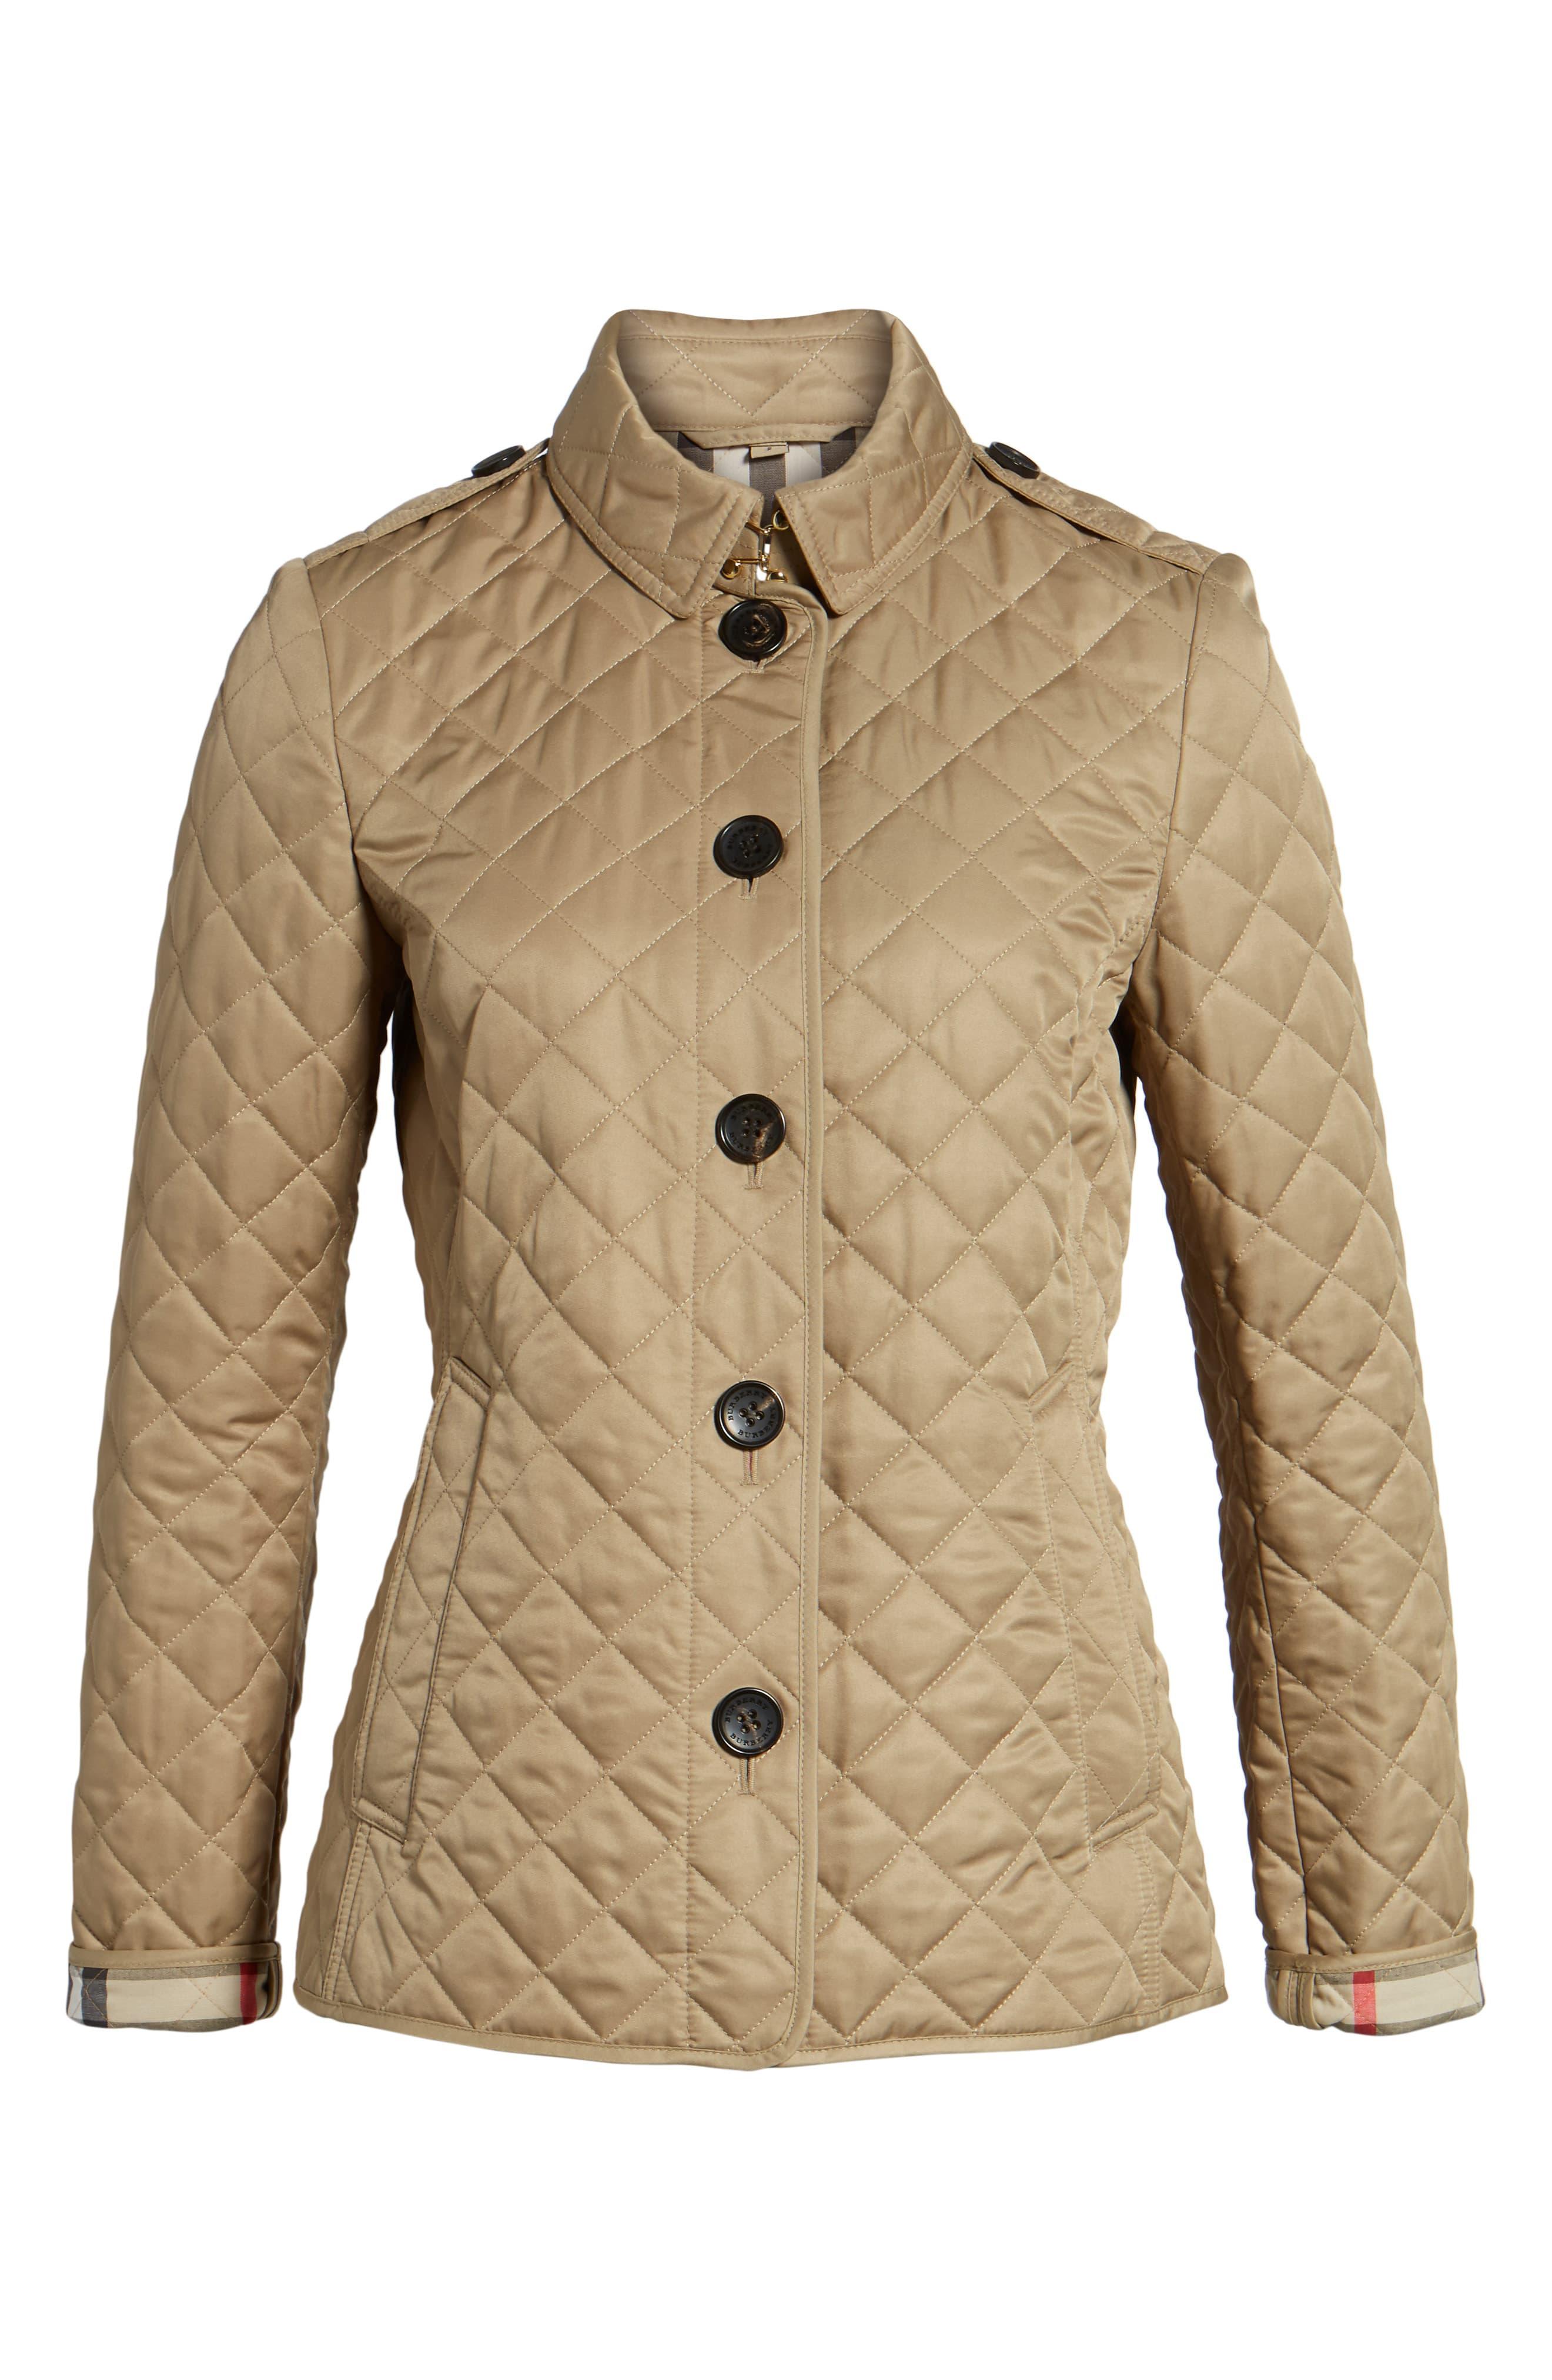 Burberry Ashurst Quilted Jacket in Natural - Lyst